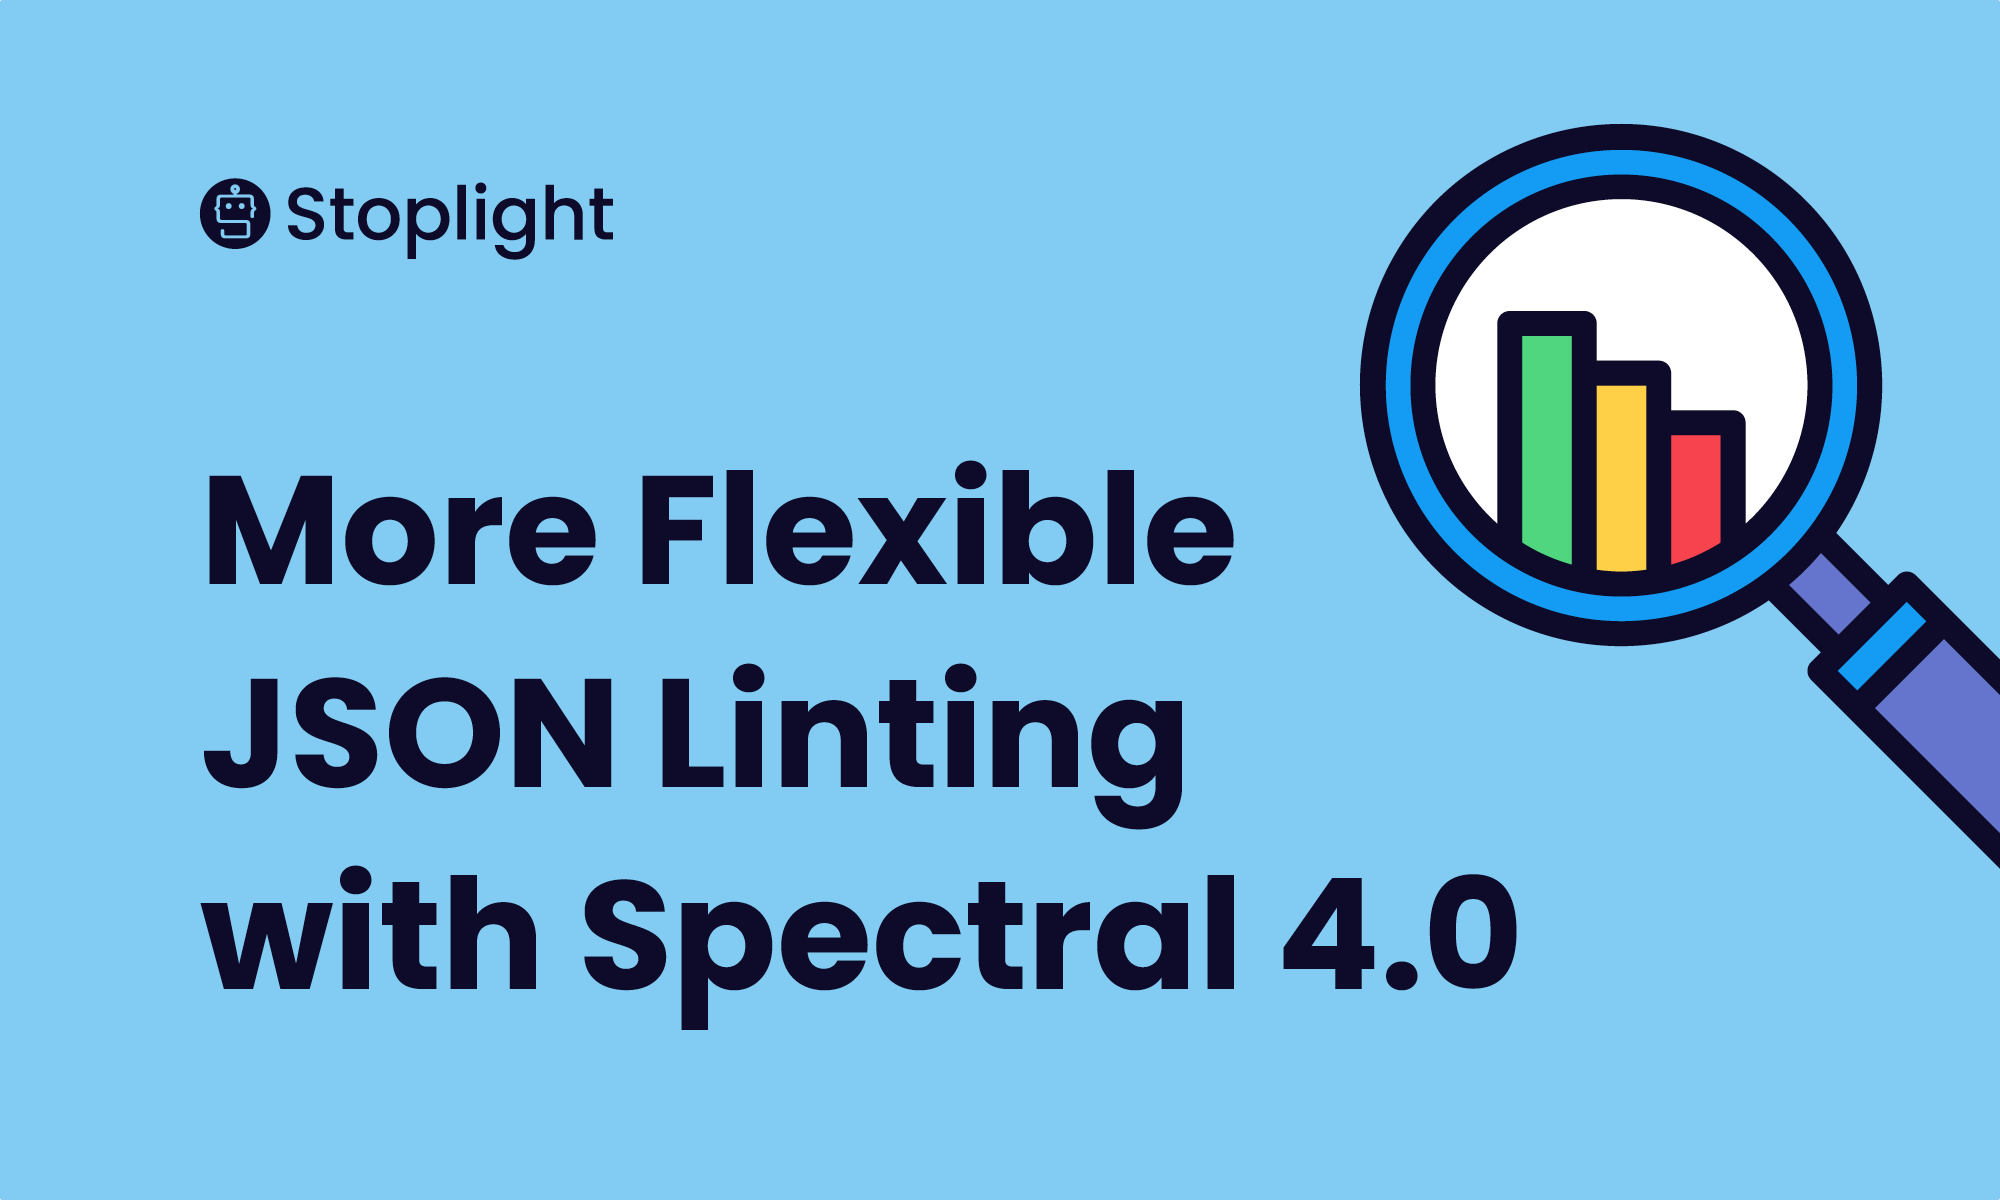 More Flexible JSON Linting with Spectral 4.0